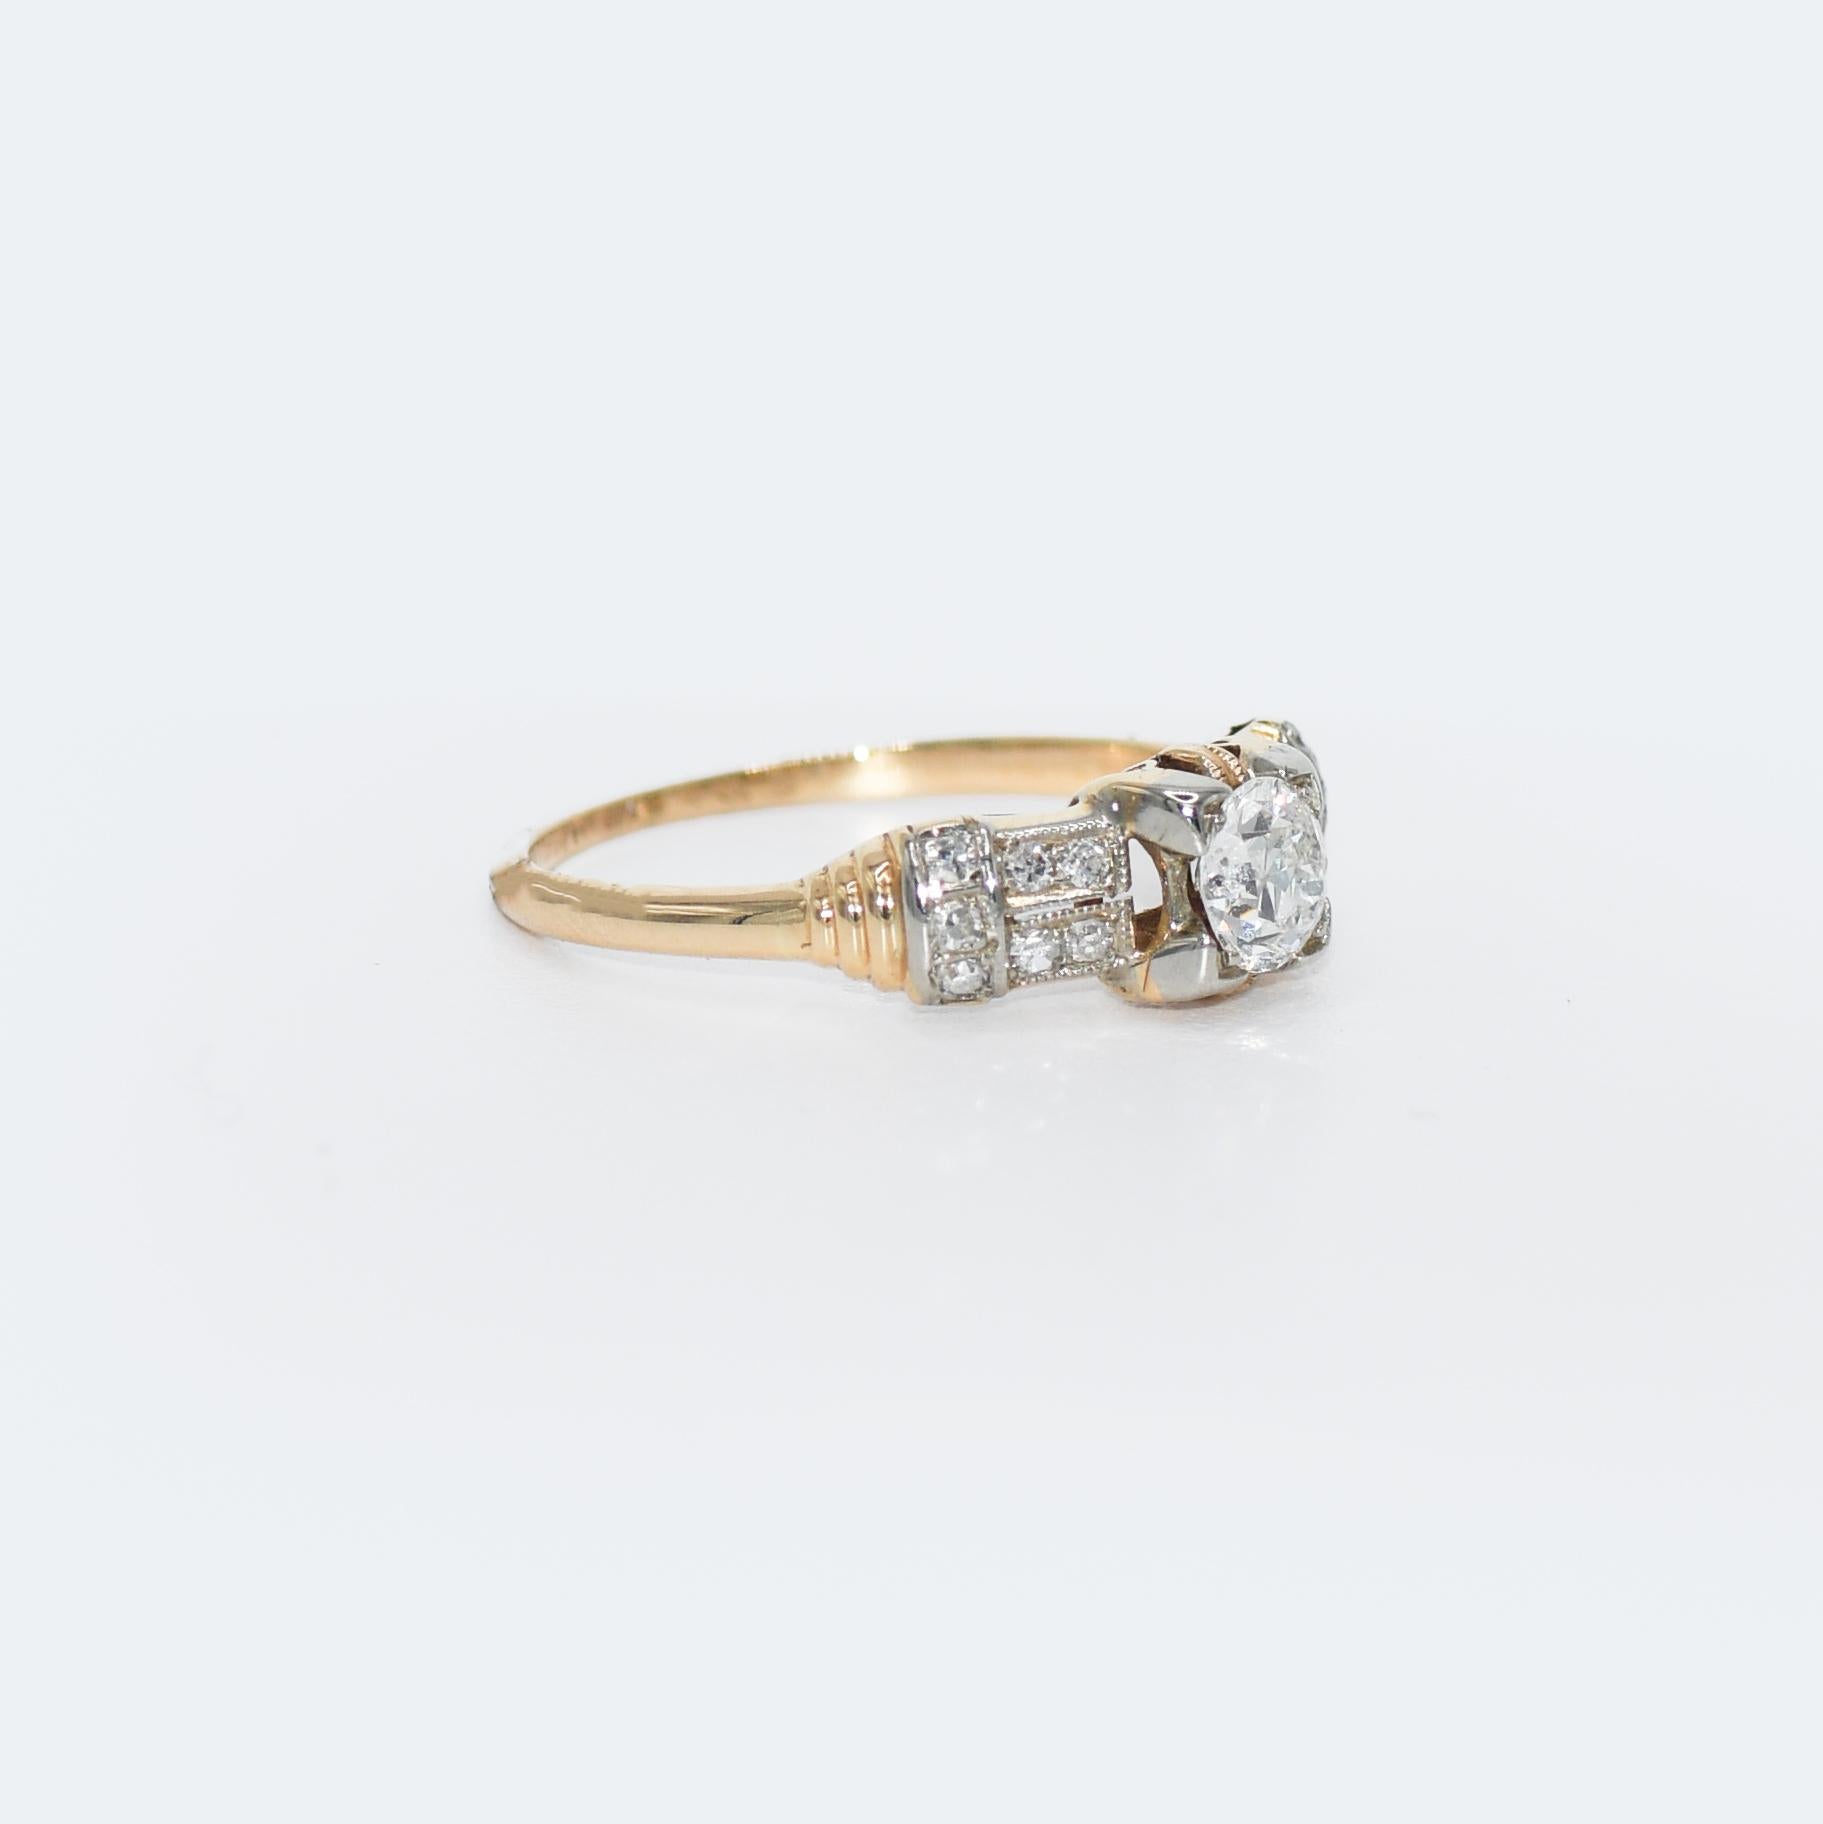 This Art Deco 18 karat yellow gold ring
Contains a solitaire old cut diamond, with a carat weight of 0.40, a VS2 clarity, and an H color.
This diamond is accented by diamonds on each side, with a carat weight of 0.14.
The ring is a size 6.5 and in